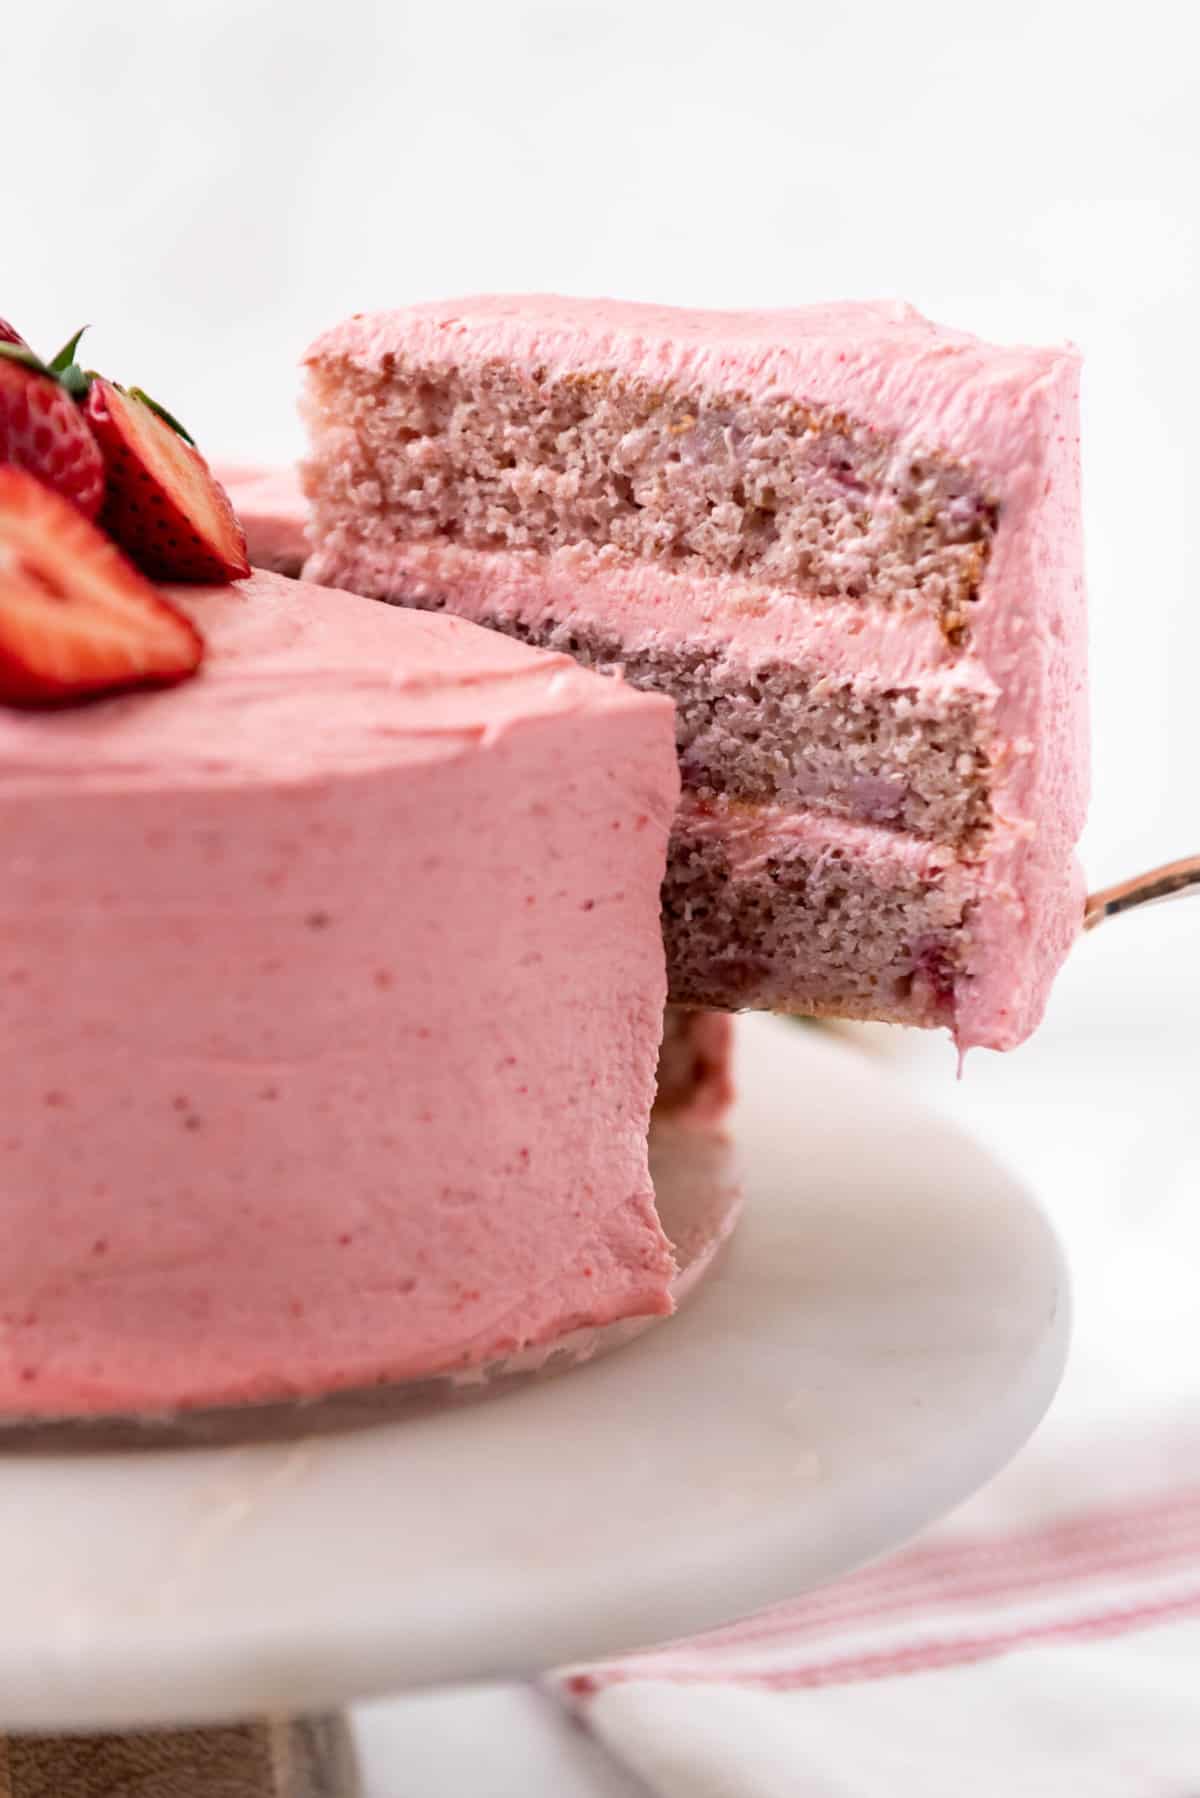 Close up of a slice of strawberry cake being lifted out of the full cake.